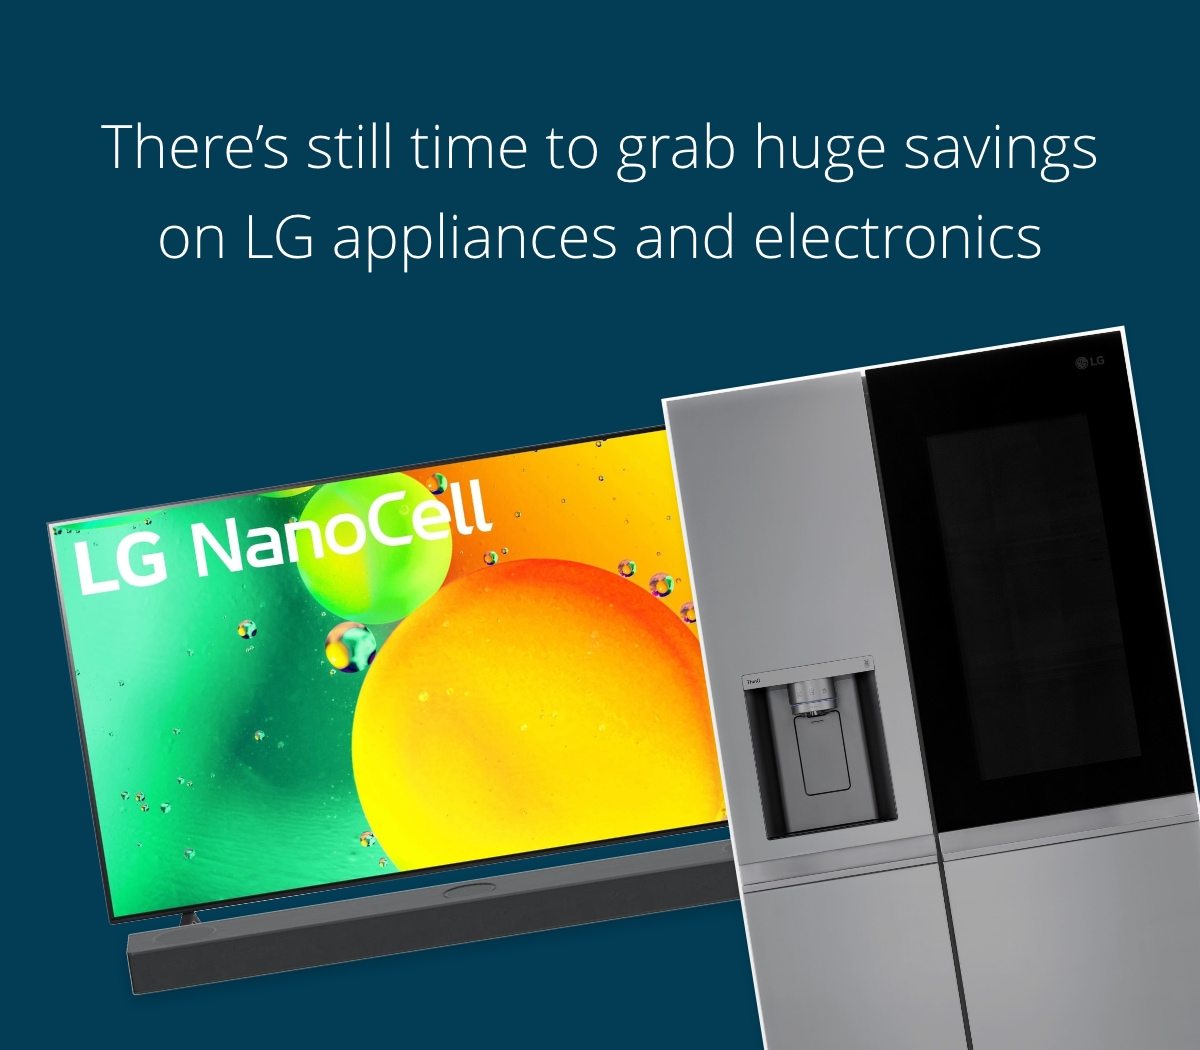 Save on LG electronics and appliances